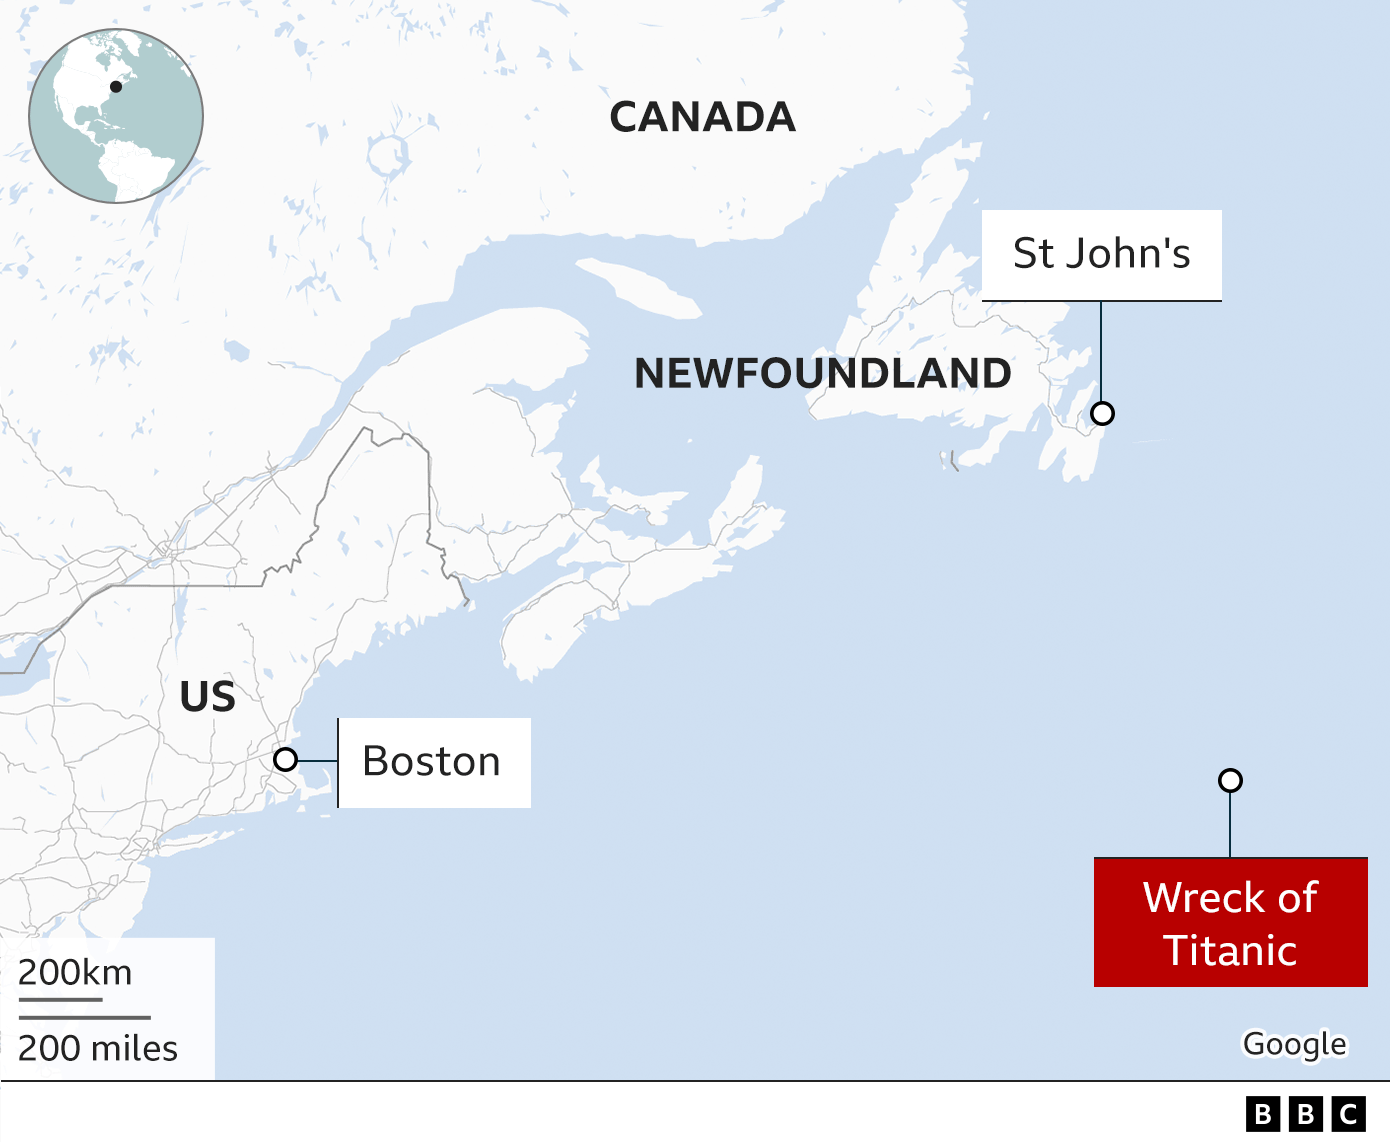 Map shows the location of the Titanic wreck